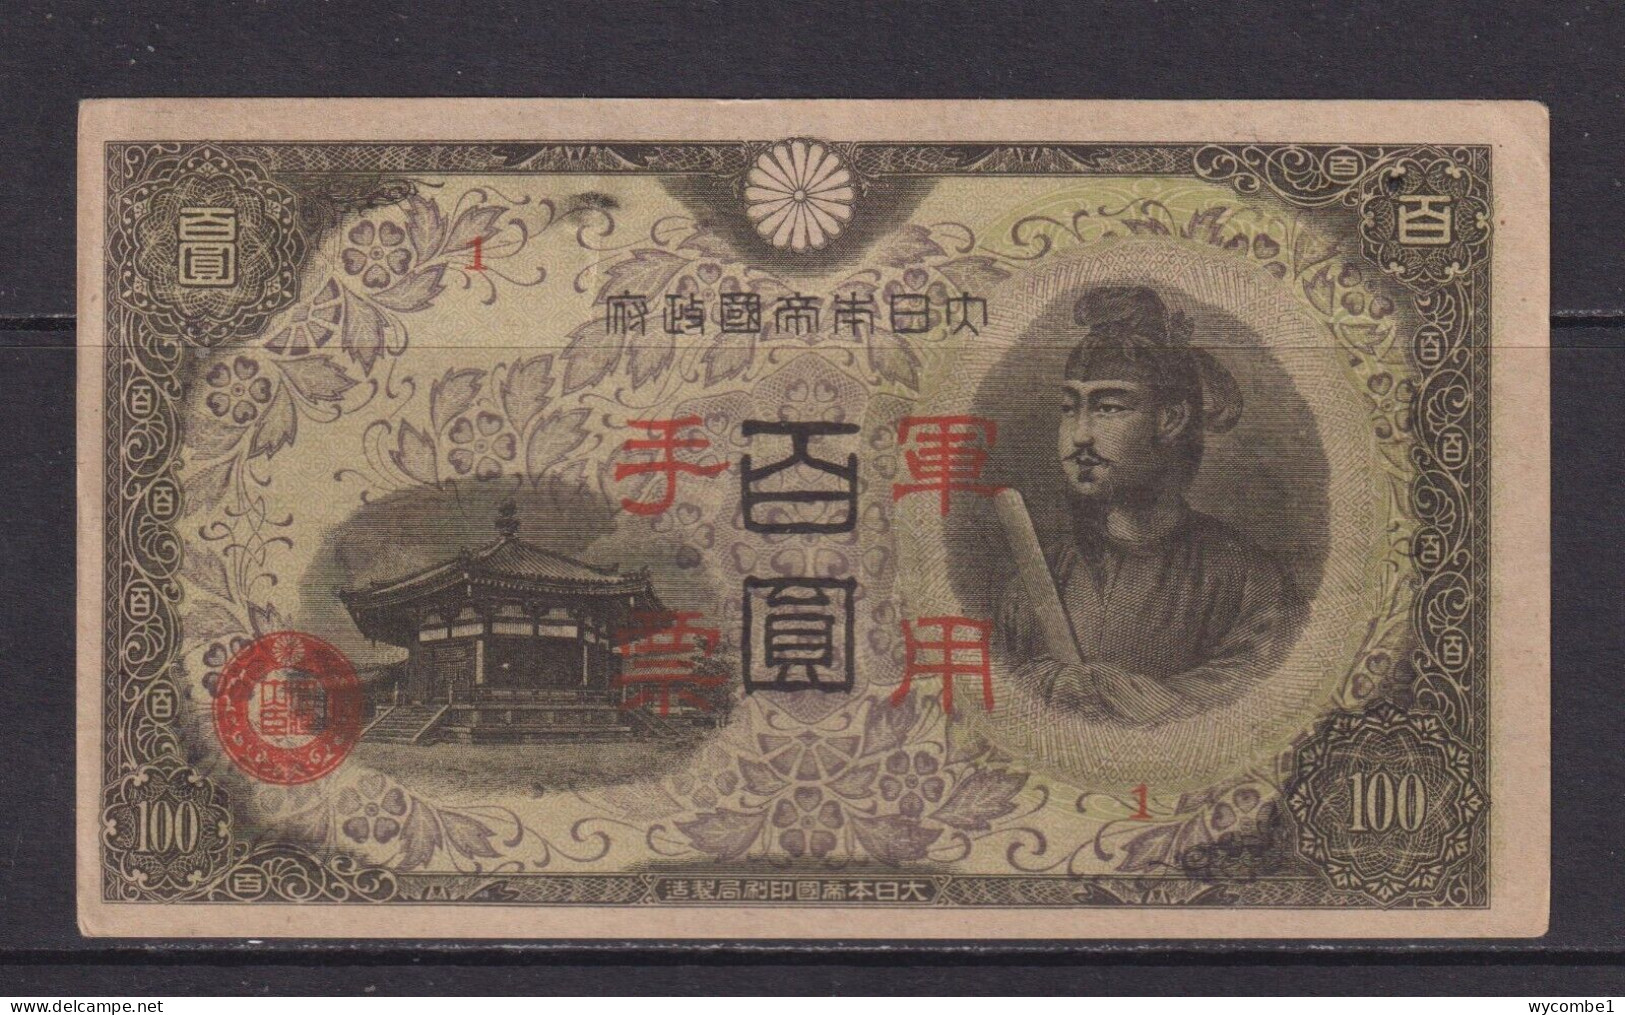 CHINA - 1945 Japanese Occupation 100 Yen AUNC/XF Banknote - Giappone